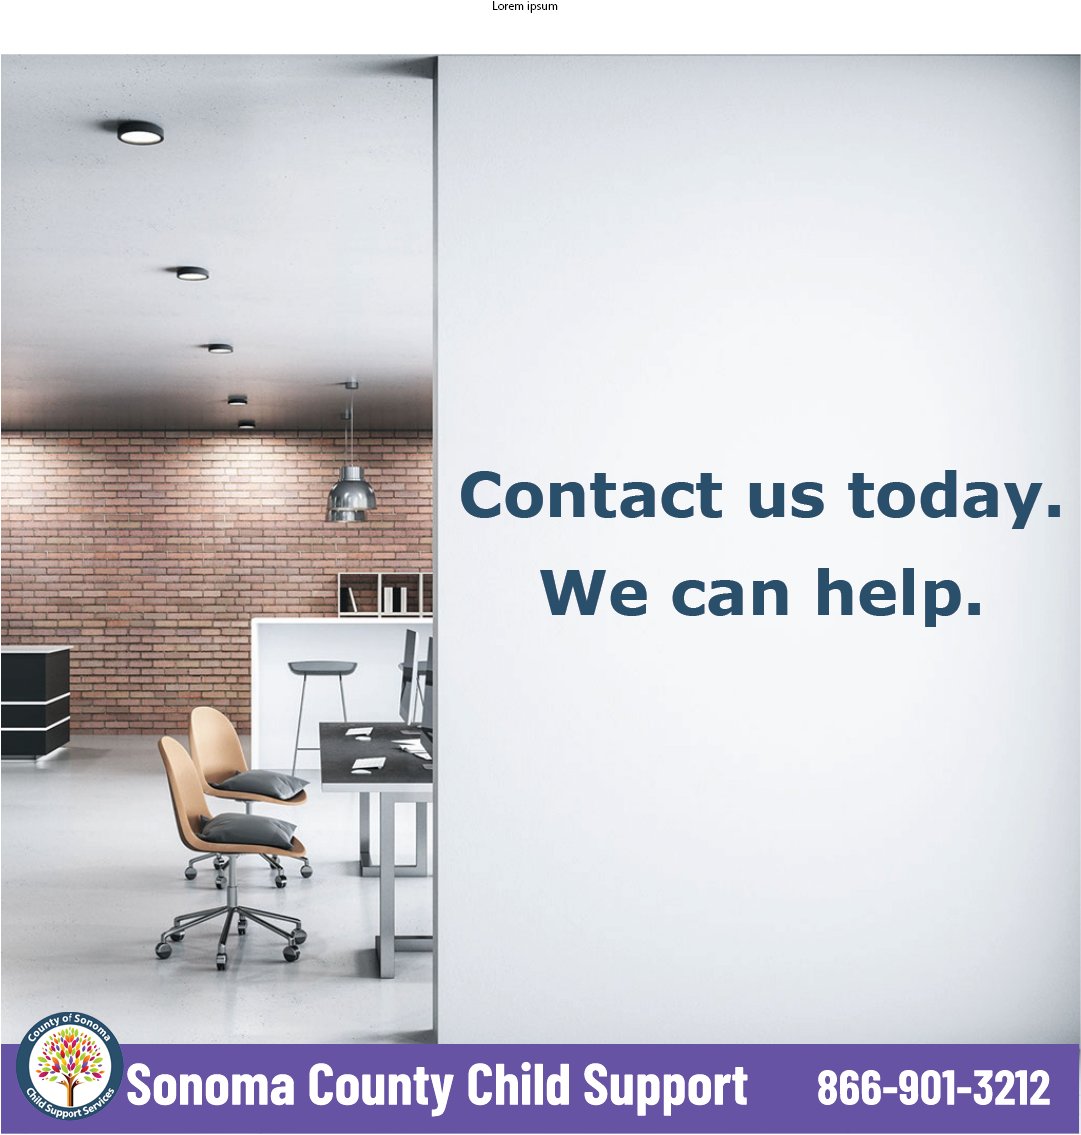 We can help with paperwork, establishing parentage, and enrolling for services.

The Santa Rosa office is open Monday - Friday from 8 a.m. - 4:30 p.m. The Petaluma office is open on Thursdays from 8:30 a.m. - 4:30 p.m.

Make sure to follow us for more useful info and tips.